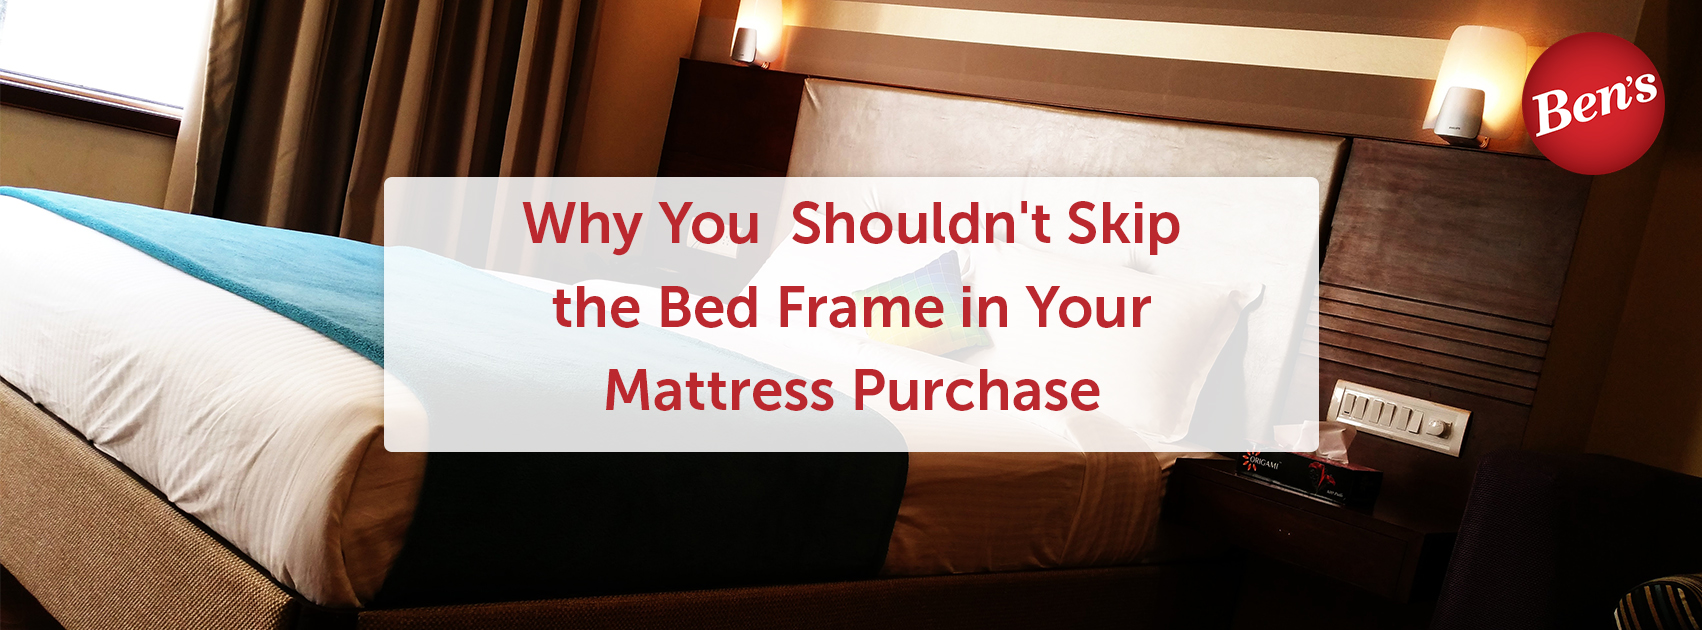 Why You Shouldn't Skip the Bed Frame in Your Mattress Purchase